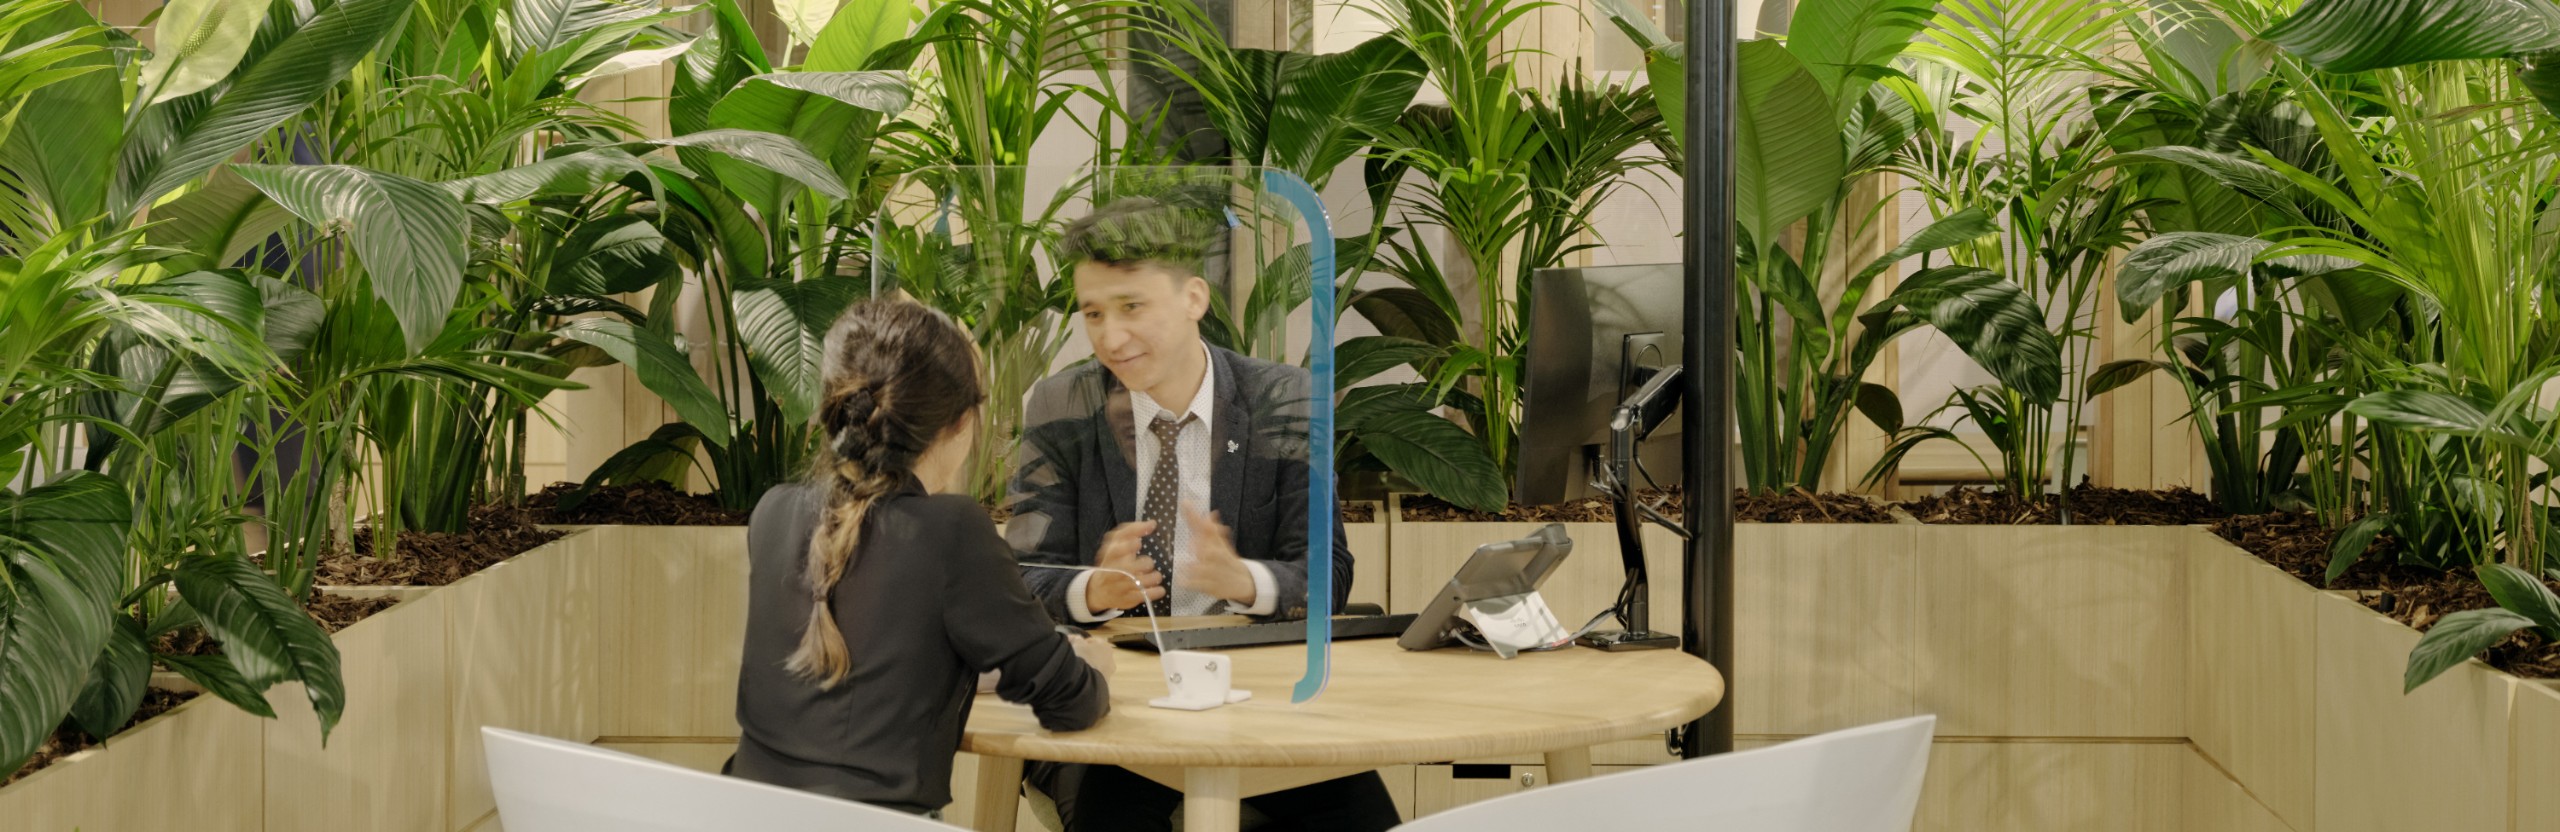 A male ANZ branch employees talks to a woman with dark hair. They are sitting at a desk surrounded by plants